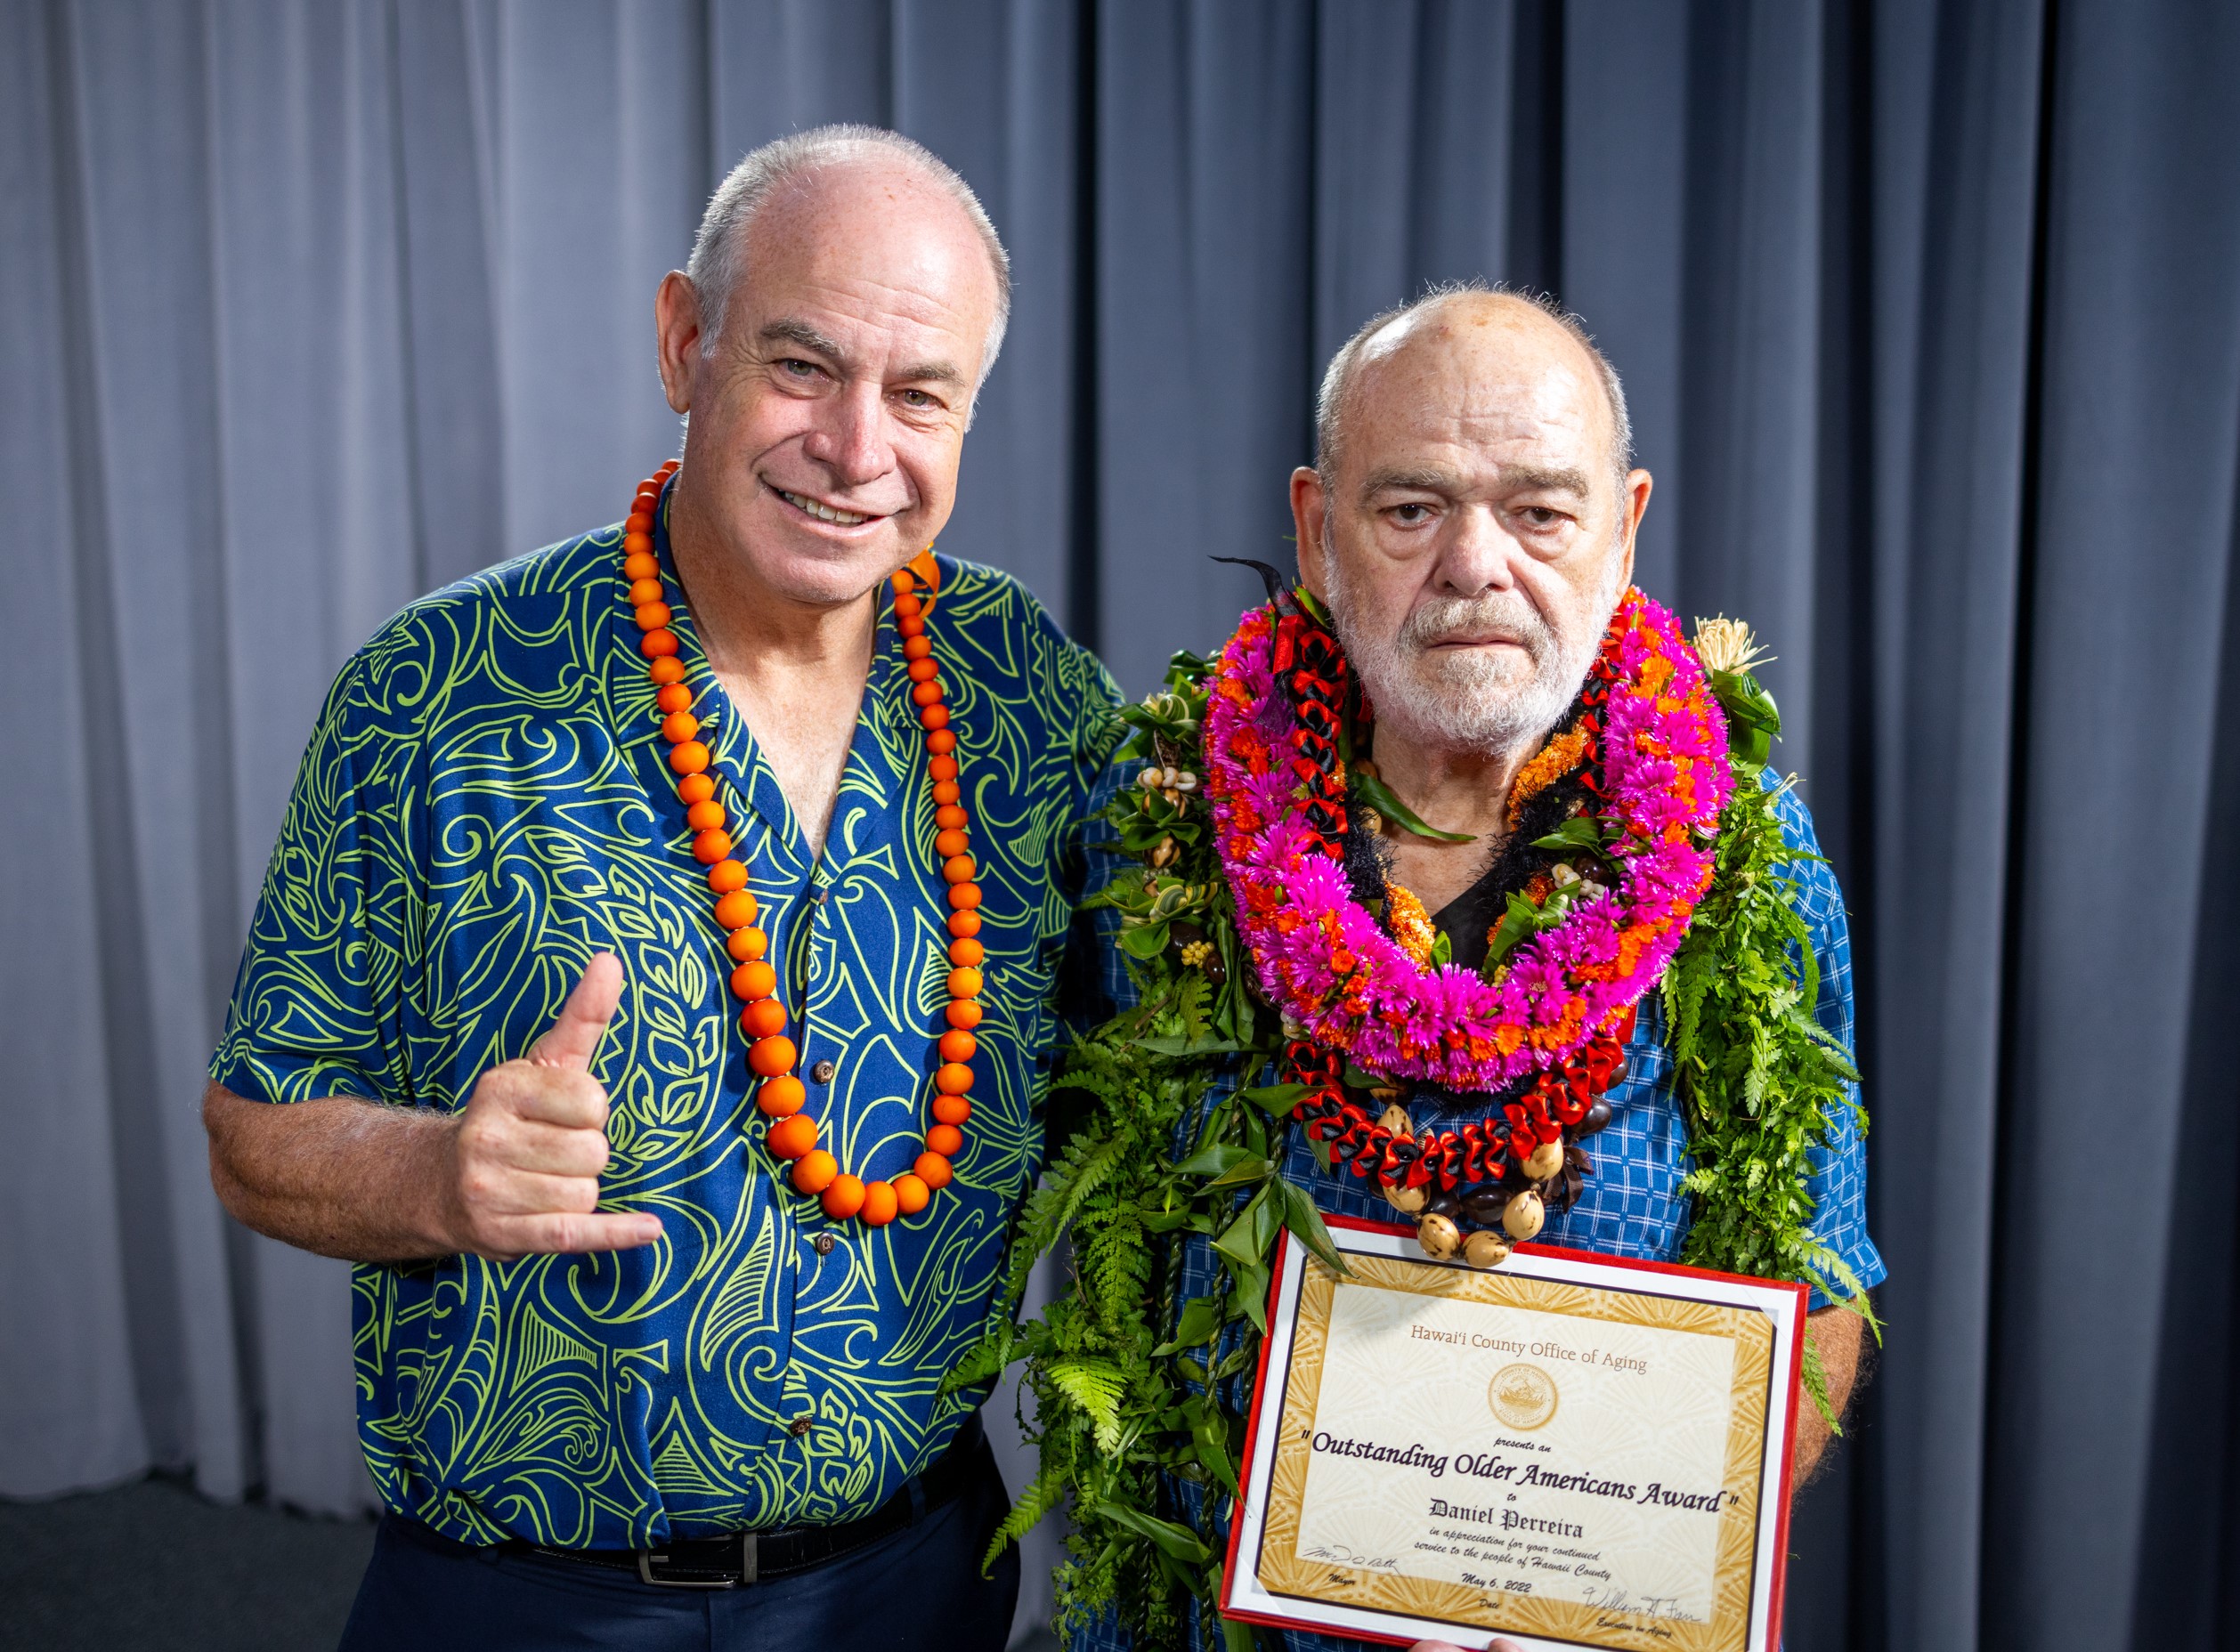 Older American Awardee Daniel Perreira pictured with Hawai’i County Mayor Mitch Roth